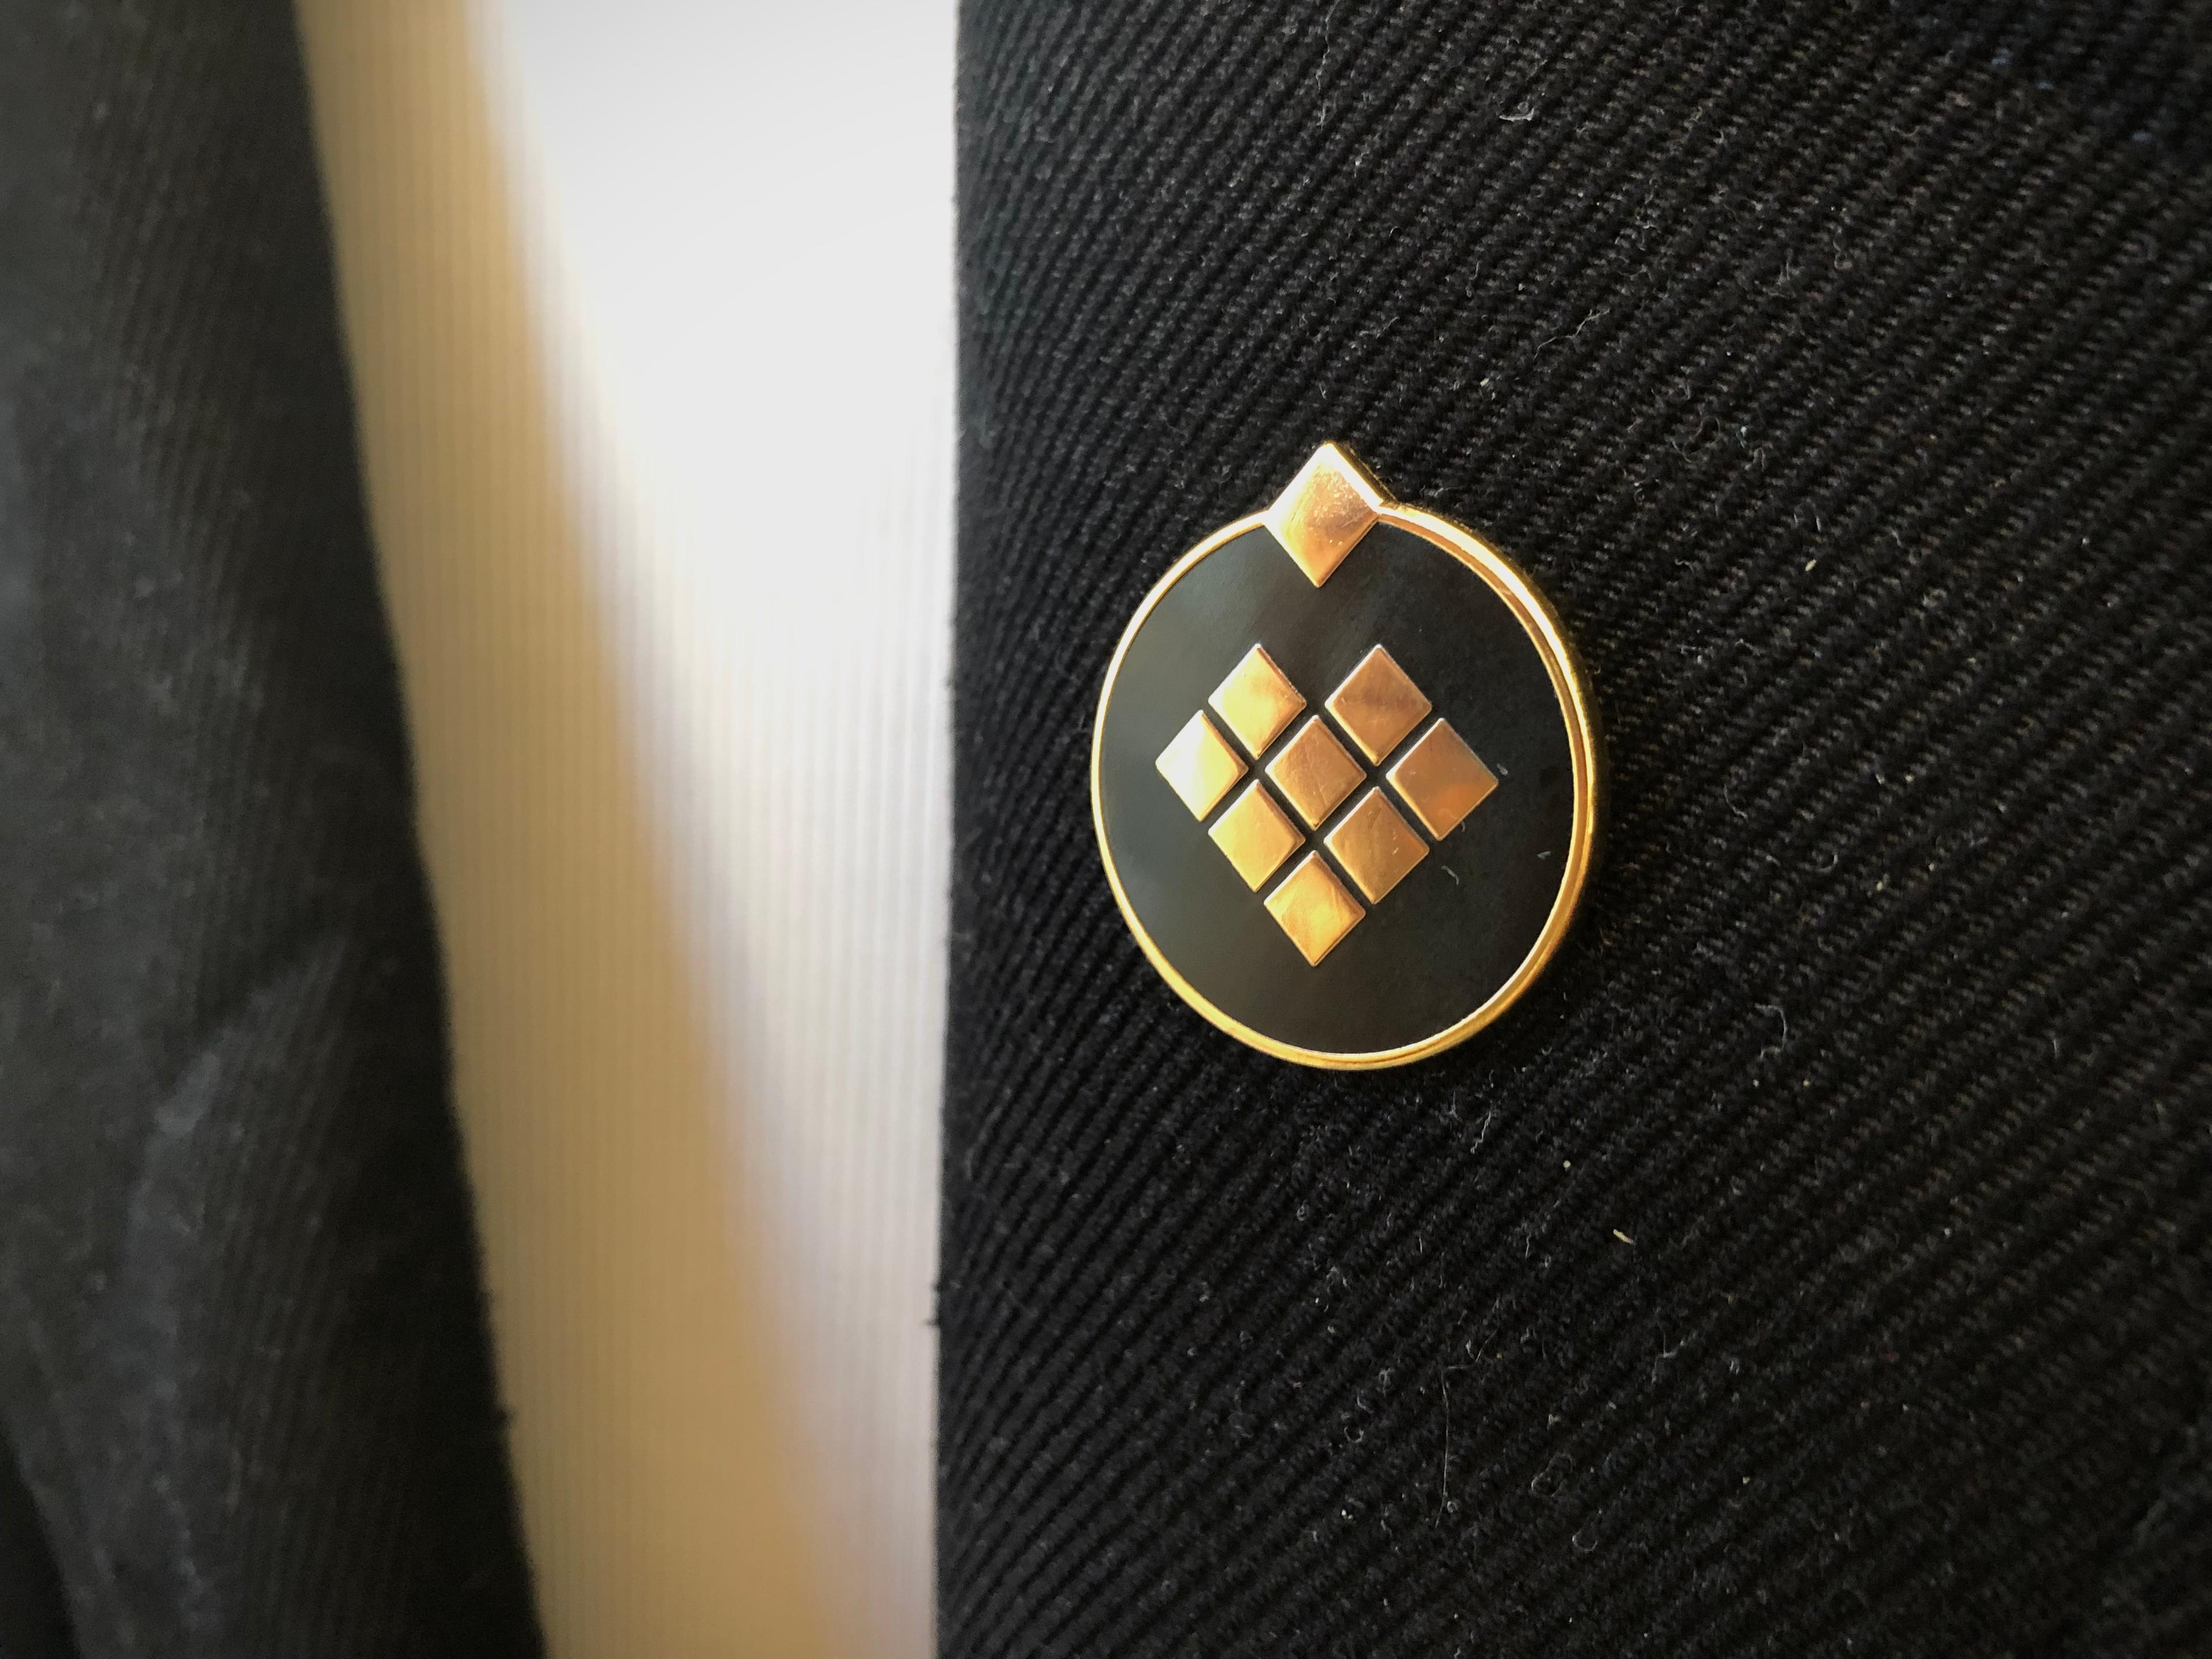 The black and gold 1 year pledge pin